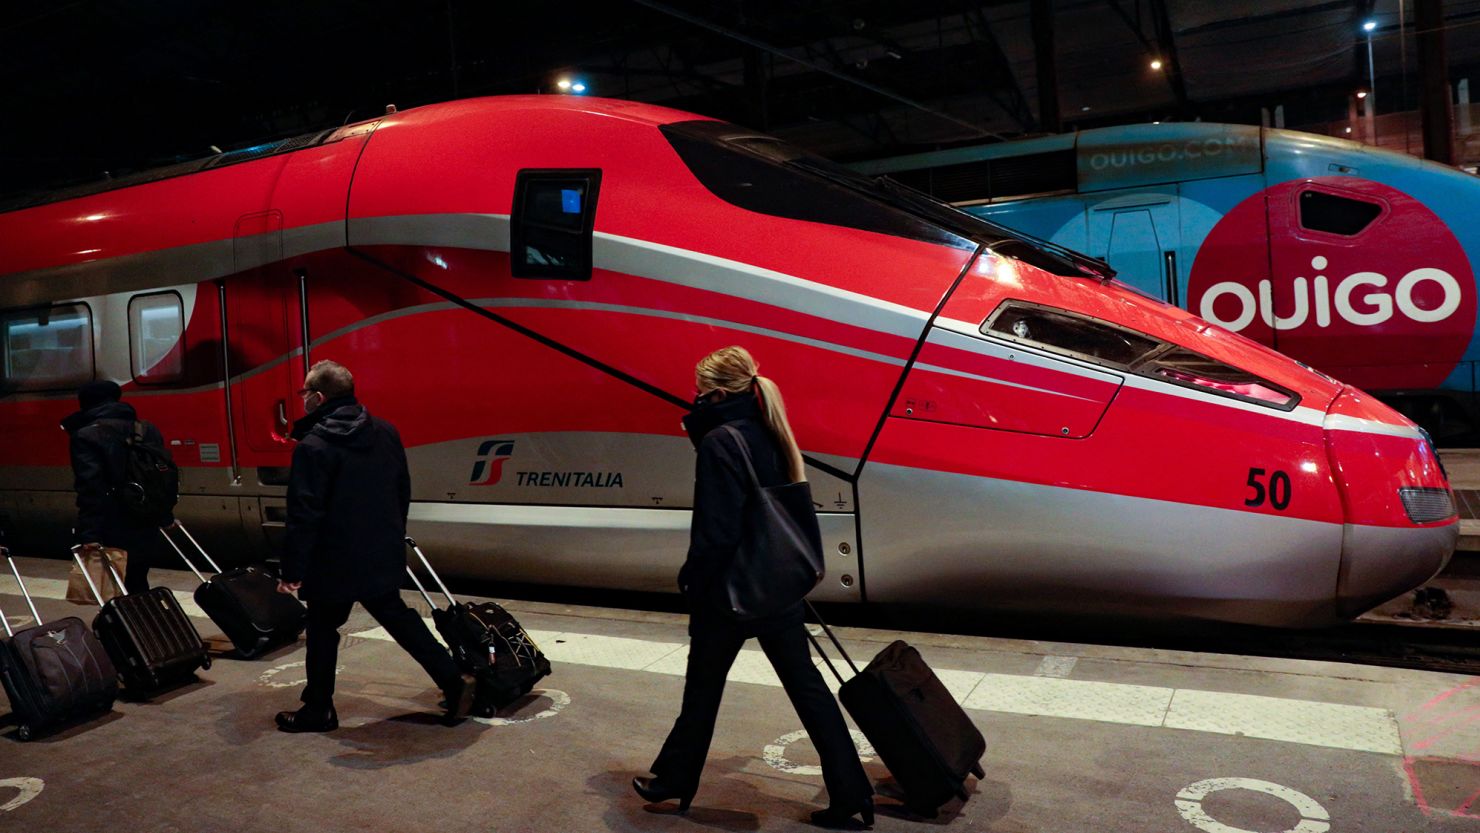 Europe wants a high-speed rail network to replace airplanes